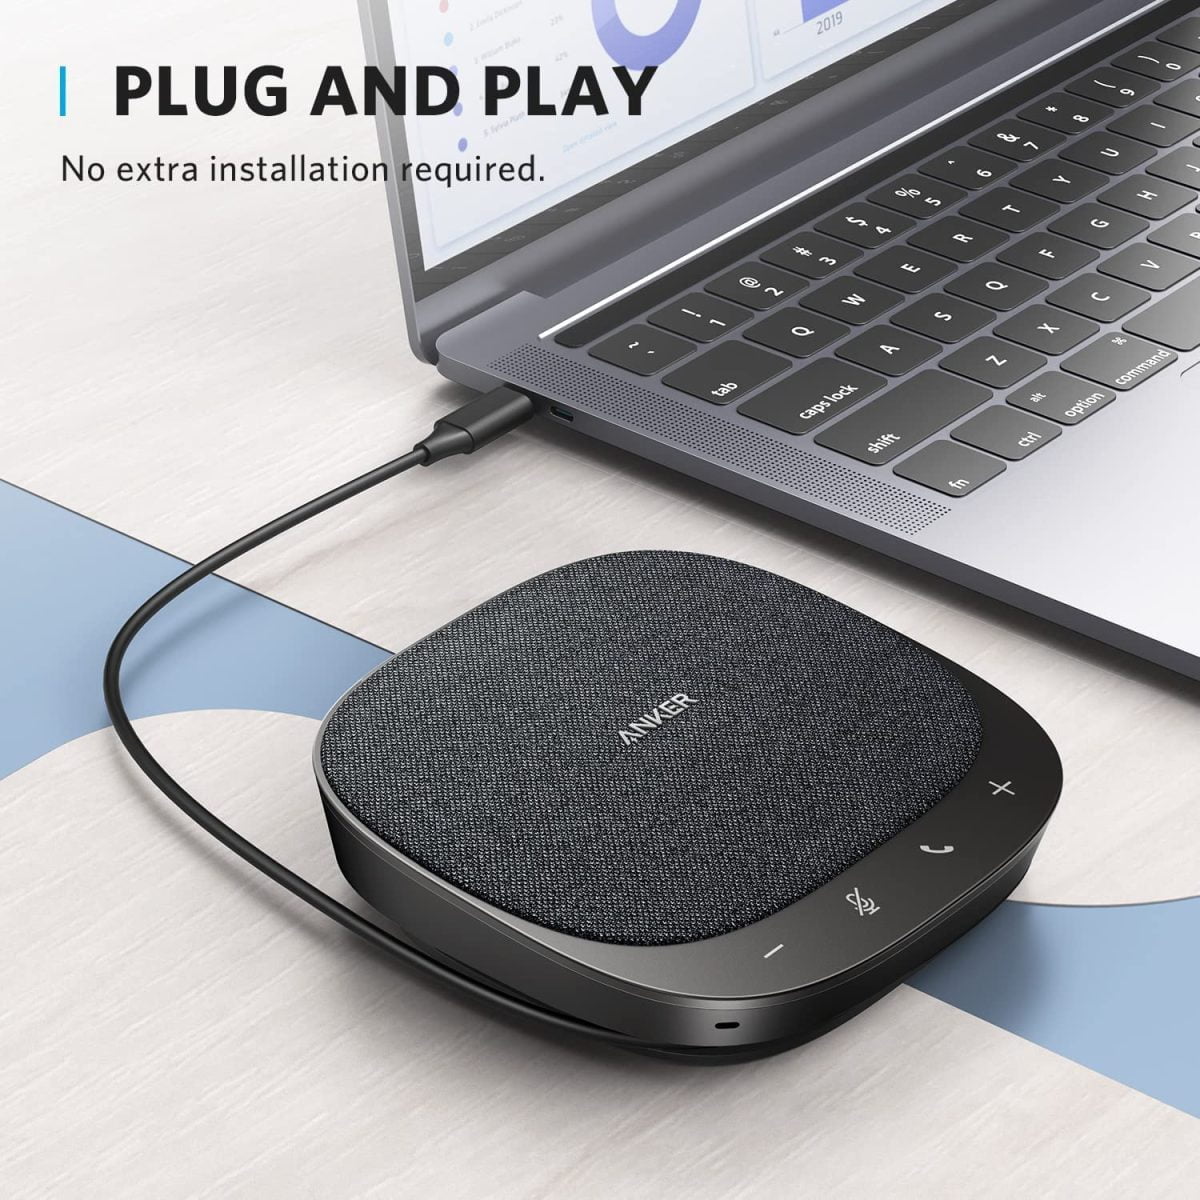 81Iqalakiel. Ac Sl1500 Anker &Lt;H1&Gt;Anker Powerconf S330 Usb Speakerphone&Lt;/H1&Gt; &Lt;Ul Class=&Quot;A-Unordered-List A-Vertical A-Spacing-Mini&Quot;&Gt; &Lt;Li&Gt;&Lt;Span Class=&Quot;A-List-Item&Quot;&Gt;Smart Voice Enhancement: Eliminate Background Noise While Simultaneously Enhancing Voices For A Professional Meeting Experience In Any Environment.&Lt;/Span&Gt;&Lt;/Li&Gt; &Lt;Li&Gt;&Lt;Span Class=&Quot;A-List-Item&Quot;&Gt;Plug And Play: Connect Via Usb-C (Includes Standard Usb Adapter) And Join Meetings In An Instant. A Wired Connection Offers The Most Stable And Reliable Usb Speakerphone Experience.&Lt;/Span&Gt;&Lt;/Li&Gt; &Lt;Li&Gt;&Lt;Span Class=&Quot;A-List-Item&Quot;&Gt;360° Voice Coverage: A Usb Speakerphone With 4 High-Sensitivity Microphones To Pick Up All Voices Within 3M In Super-High Clarity.&Lt;/Span&Gt;&Lt;/Li&Gt; &Lt;Li&Gt;&Lt;Span Class=&Quot;A-List-Item&Quot;&Gt;Superior Sound: A 1.75” Driver Paired With 2 Passive Bass-Radiators Adds Body And Depth To Both Meeting Audio And Music.&Lt;/Span&Gt;&Lt;/Li&Gt; &Lt;Li&Gt;&Lt;Span Class=&Quot;A-List-Item&Quot;&Gt;What’s In The Box: Powerconf S330 Usb Speakerphone, Usb-C To Usb-A Adapter.&Lt;/Span&Gt;&Lt;/Li&Gt; &Lt;/Ul&Gt; Warranty: Anker Product Warranty Speakerphone Anker Powerconf S330 Usb Speakerphone